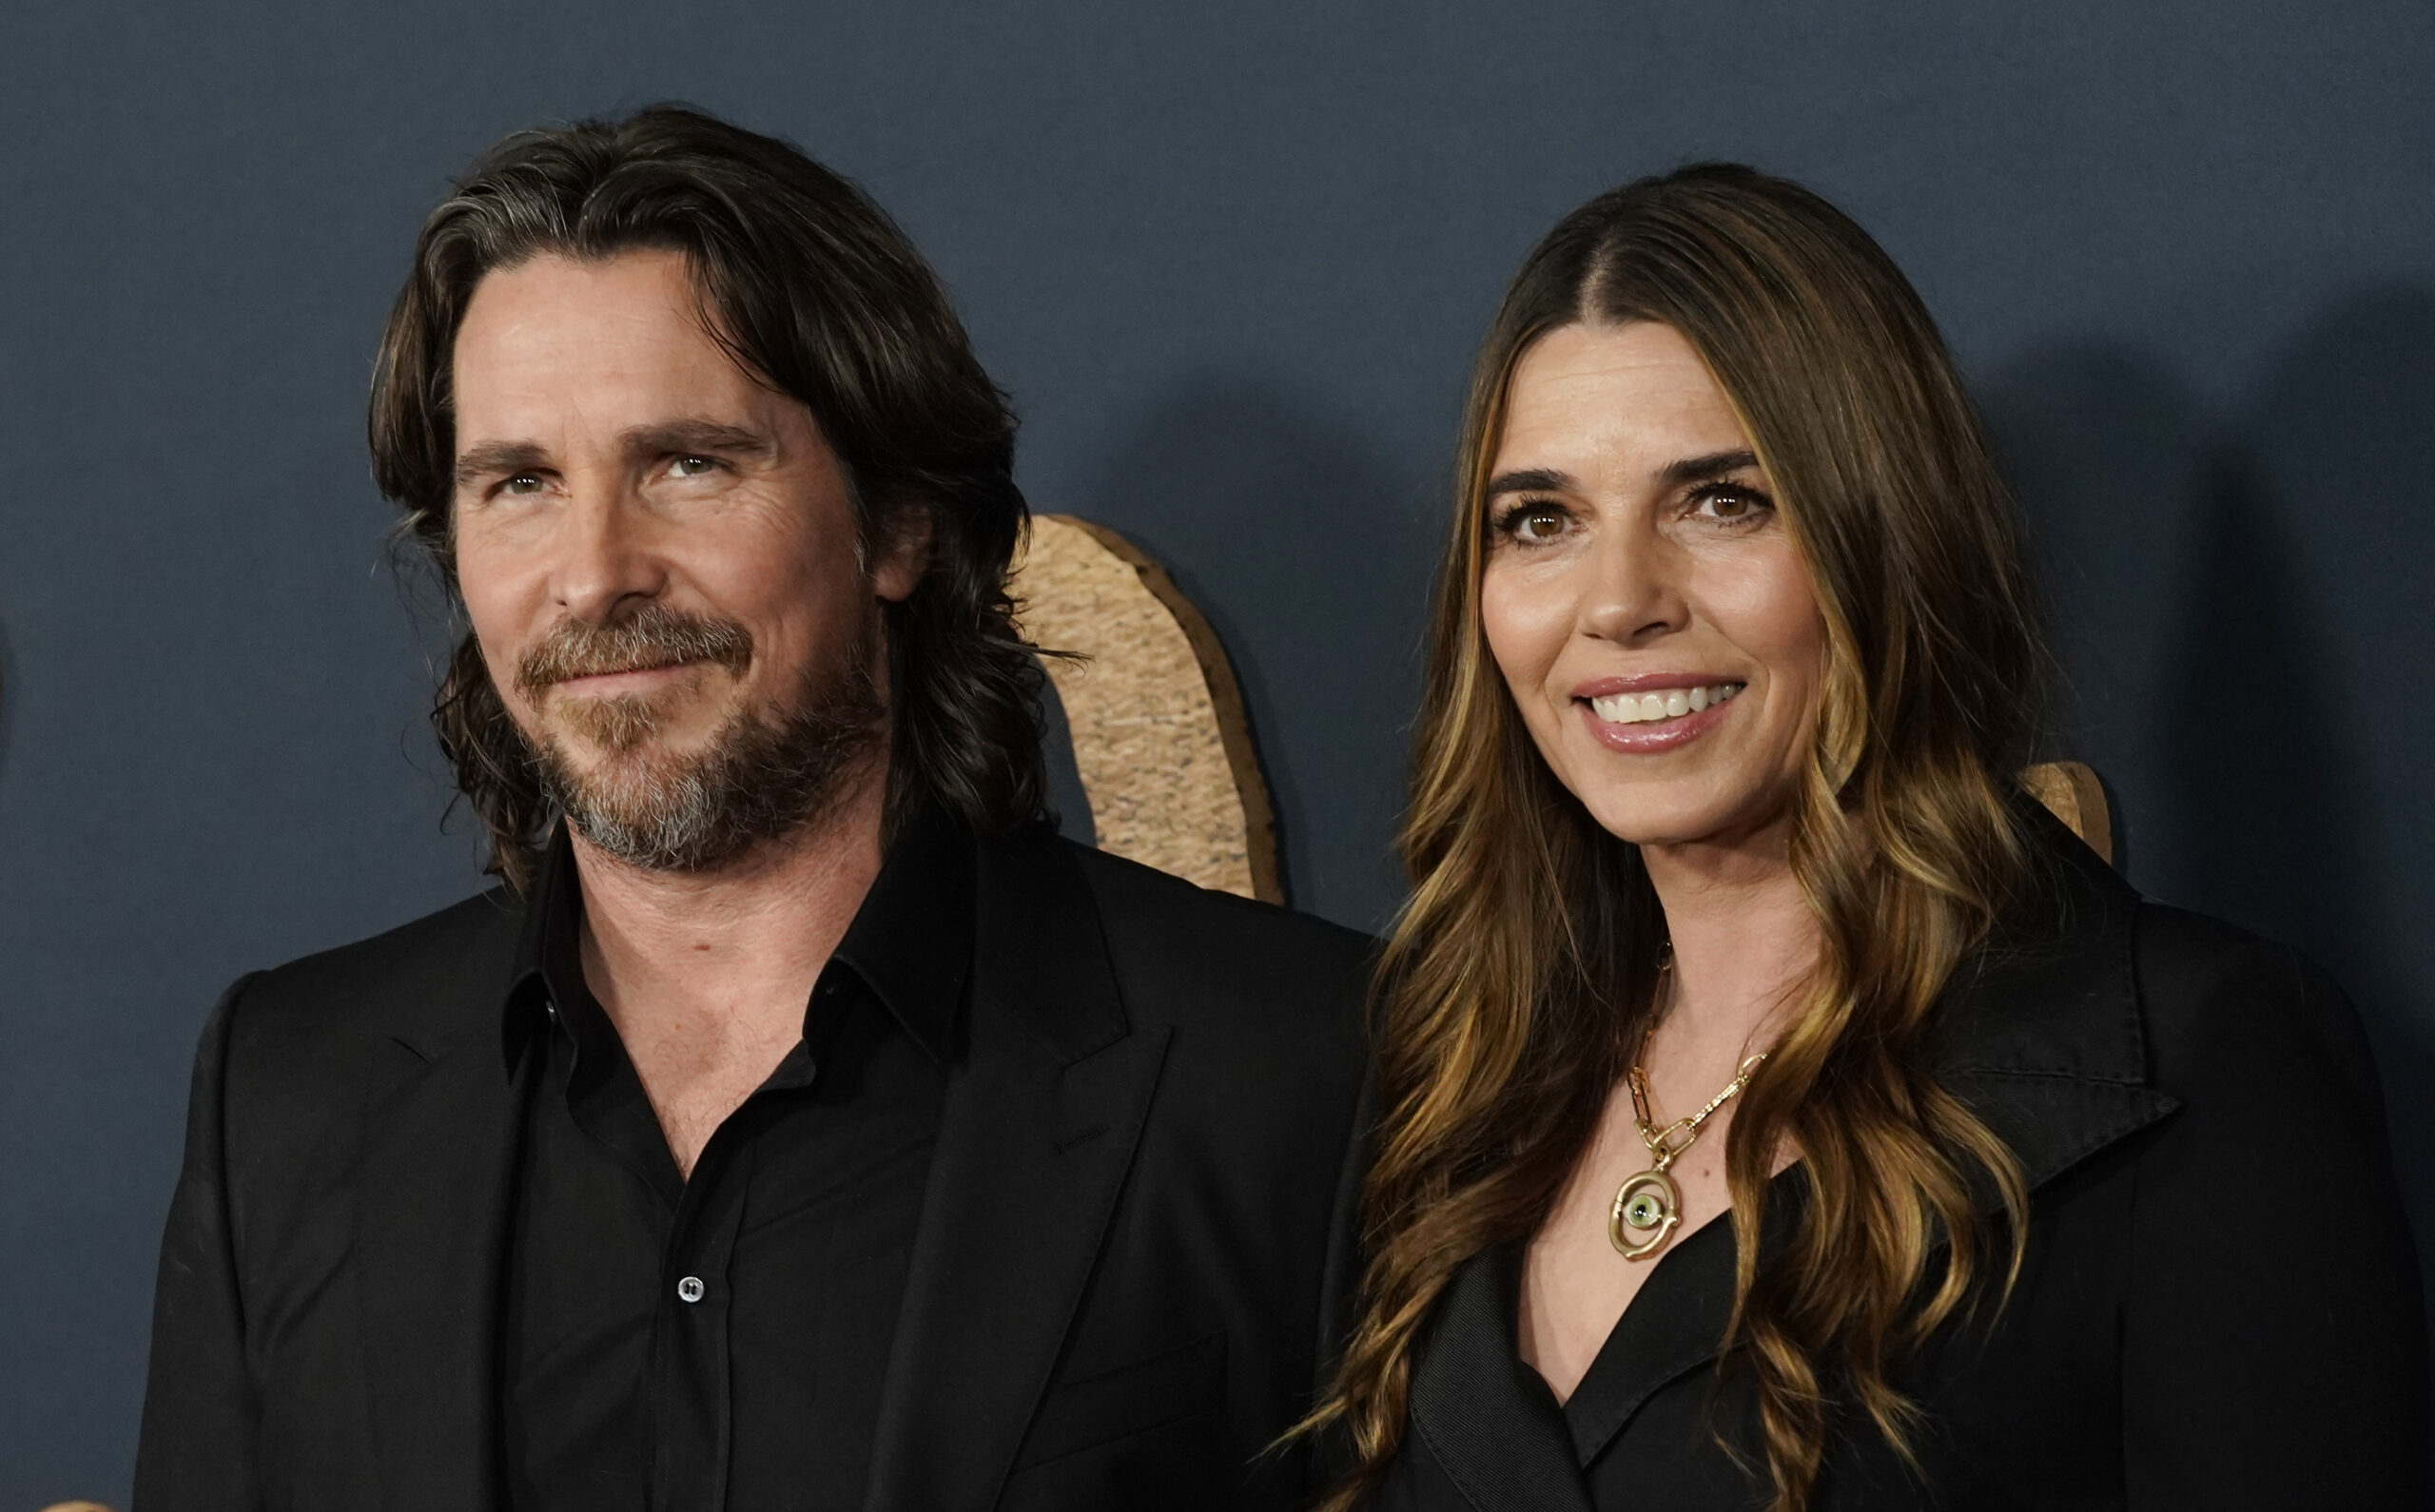 Christian Bale and his wife Sibi Blazic pose together at the premiere of the film "The Pale Blue Eye," Wednesday, Dec. 14, 2022, at the Directors Guild of America in Los Angeles. (AP Photo/Chris Pizzello)